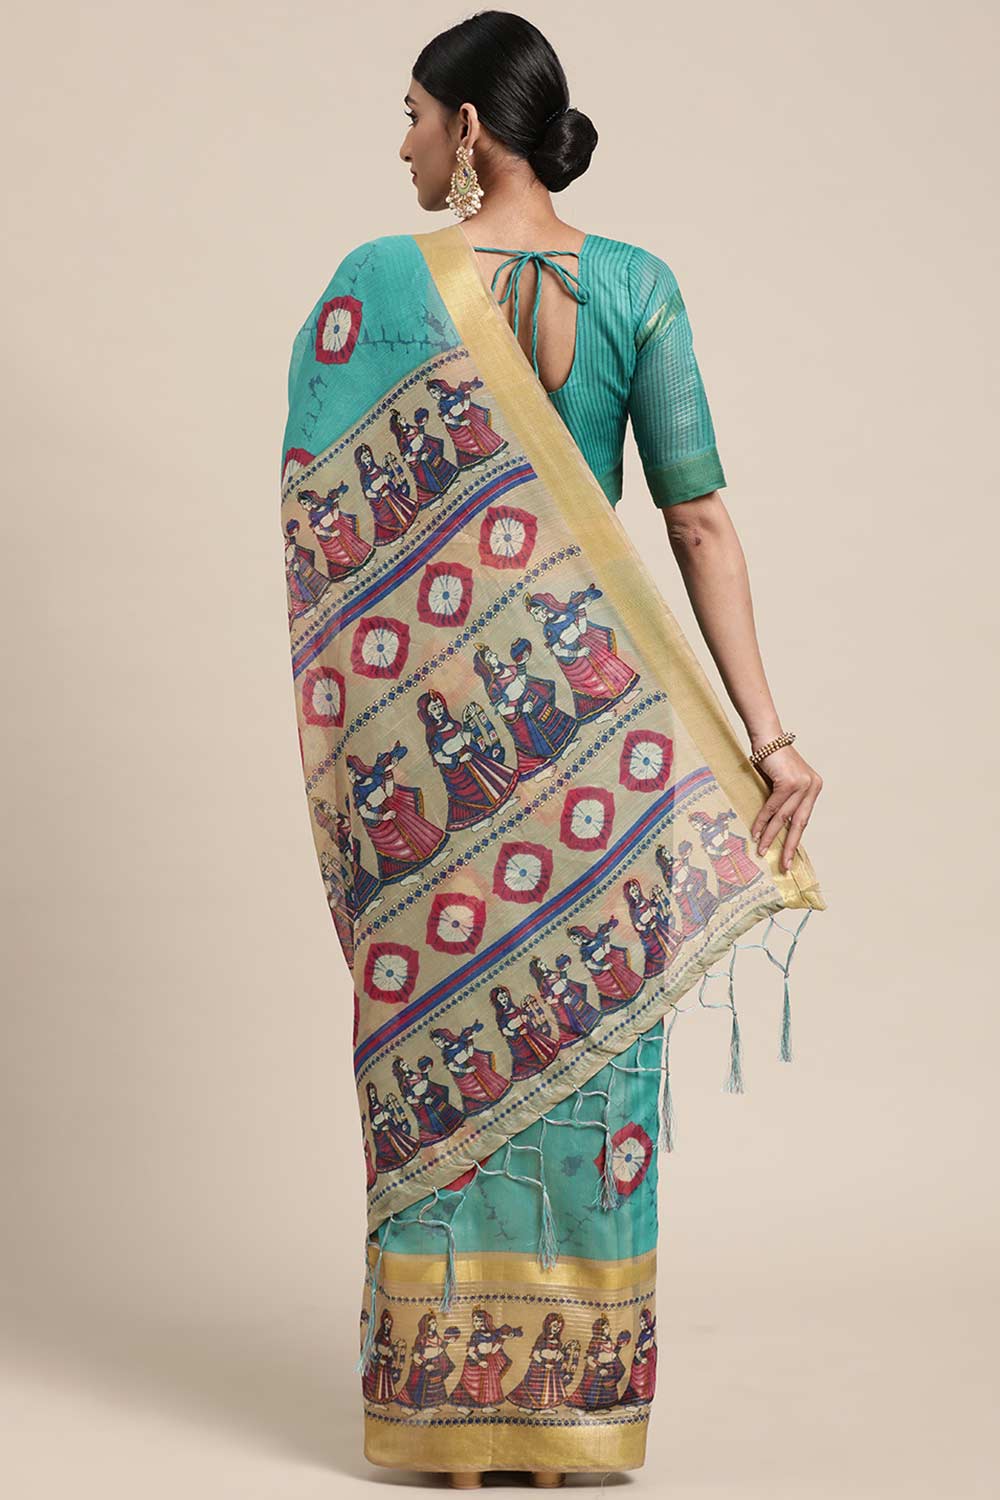 Shop Jana Teal Blue Linen Blend Bandhani One Minute Saree at best offer at our  Store - One Minute Saree